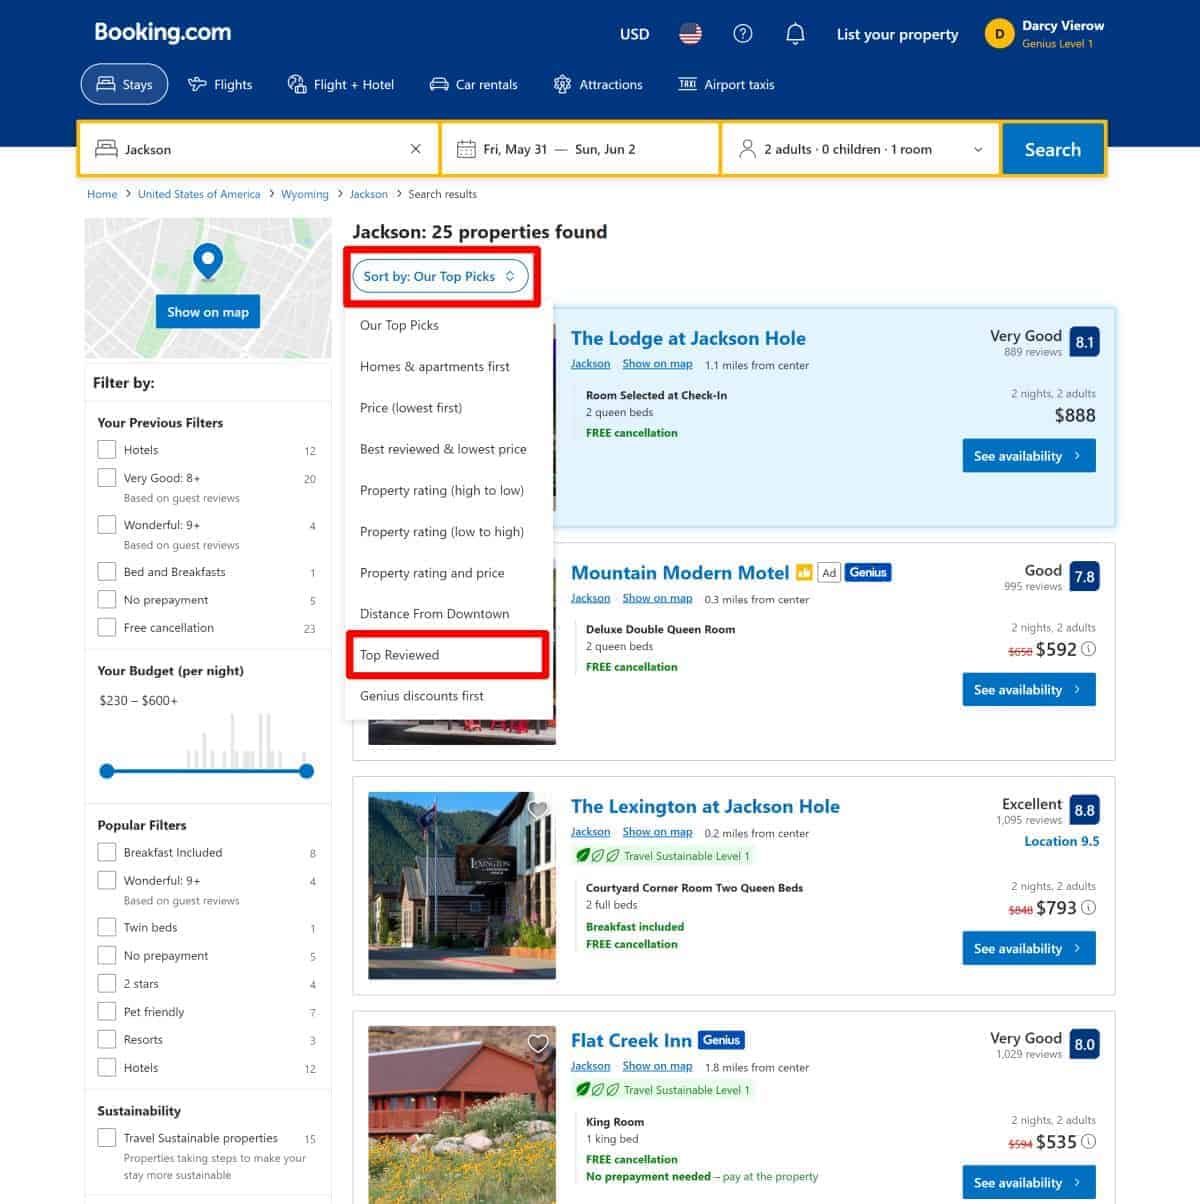 Screenshot showing other ways to sort search results on booking.com website.